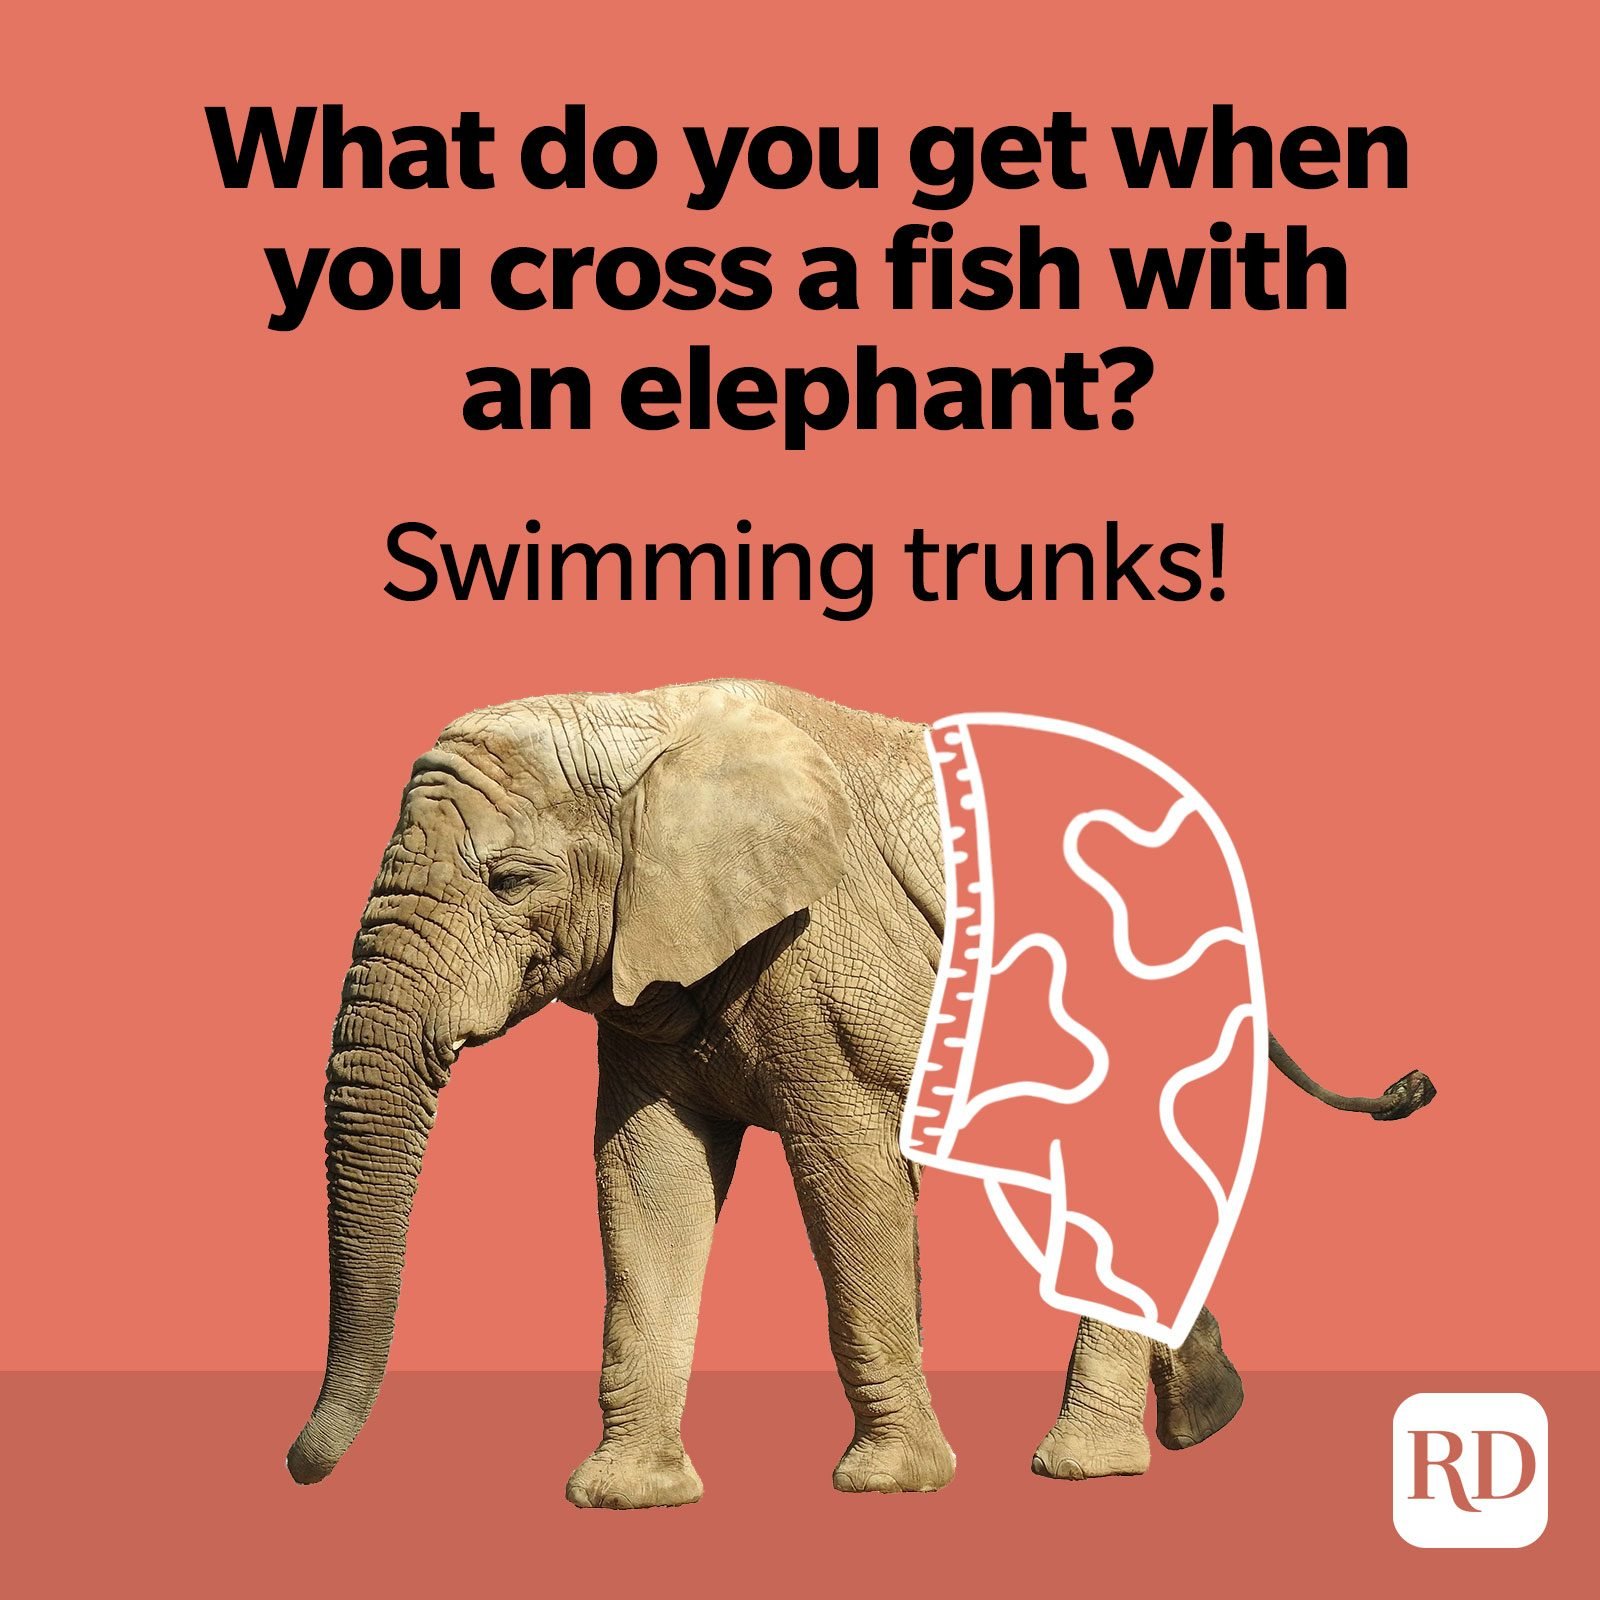 Elephant Jokes That WIll Make You Laugh Your Trunks Off | Reader's Digest